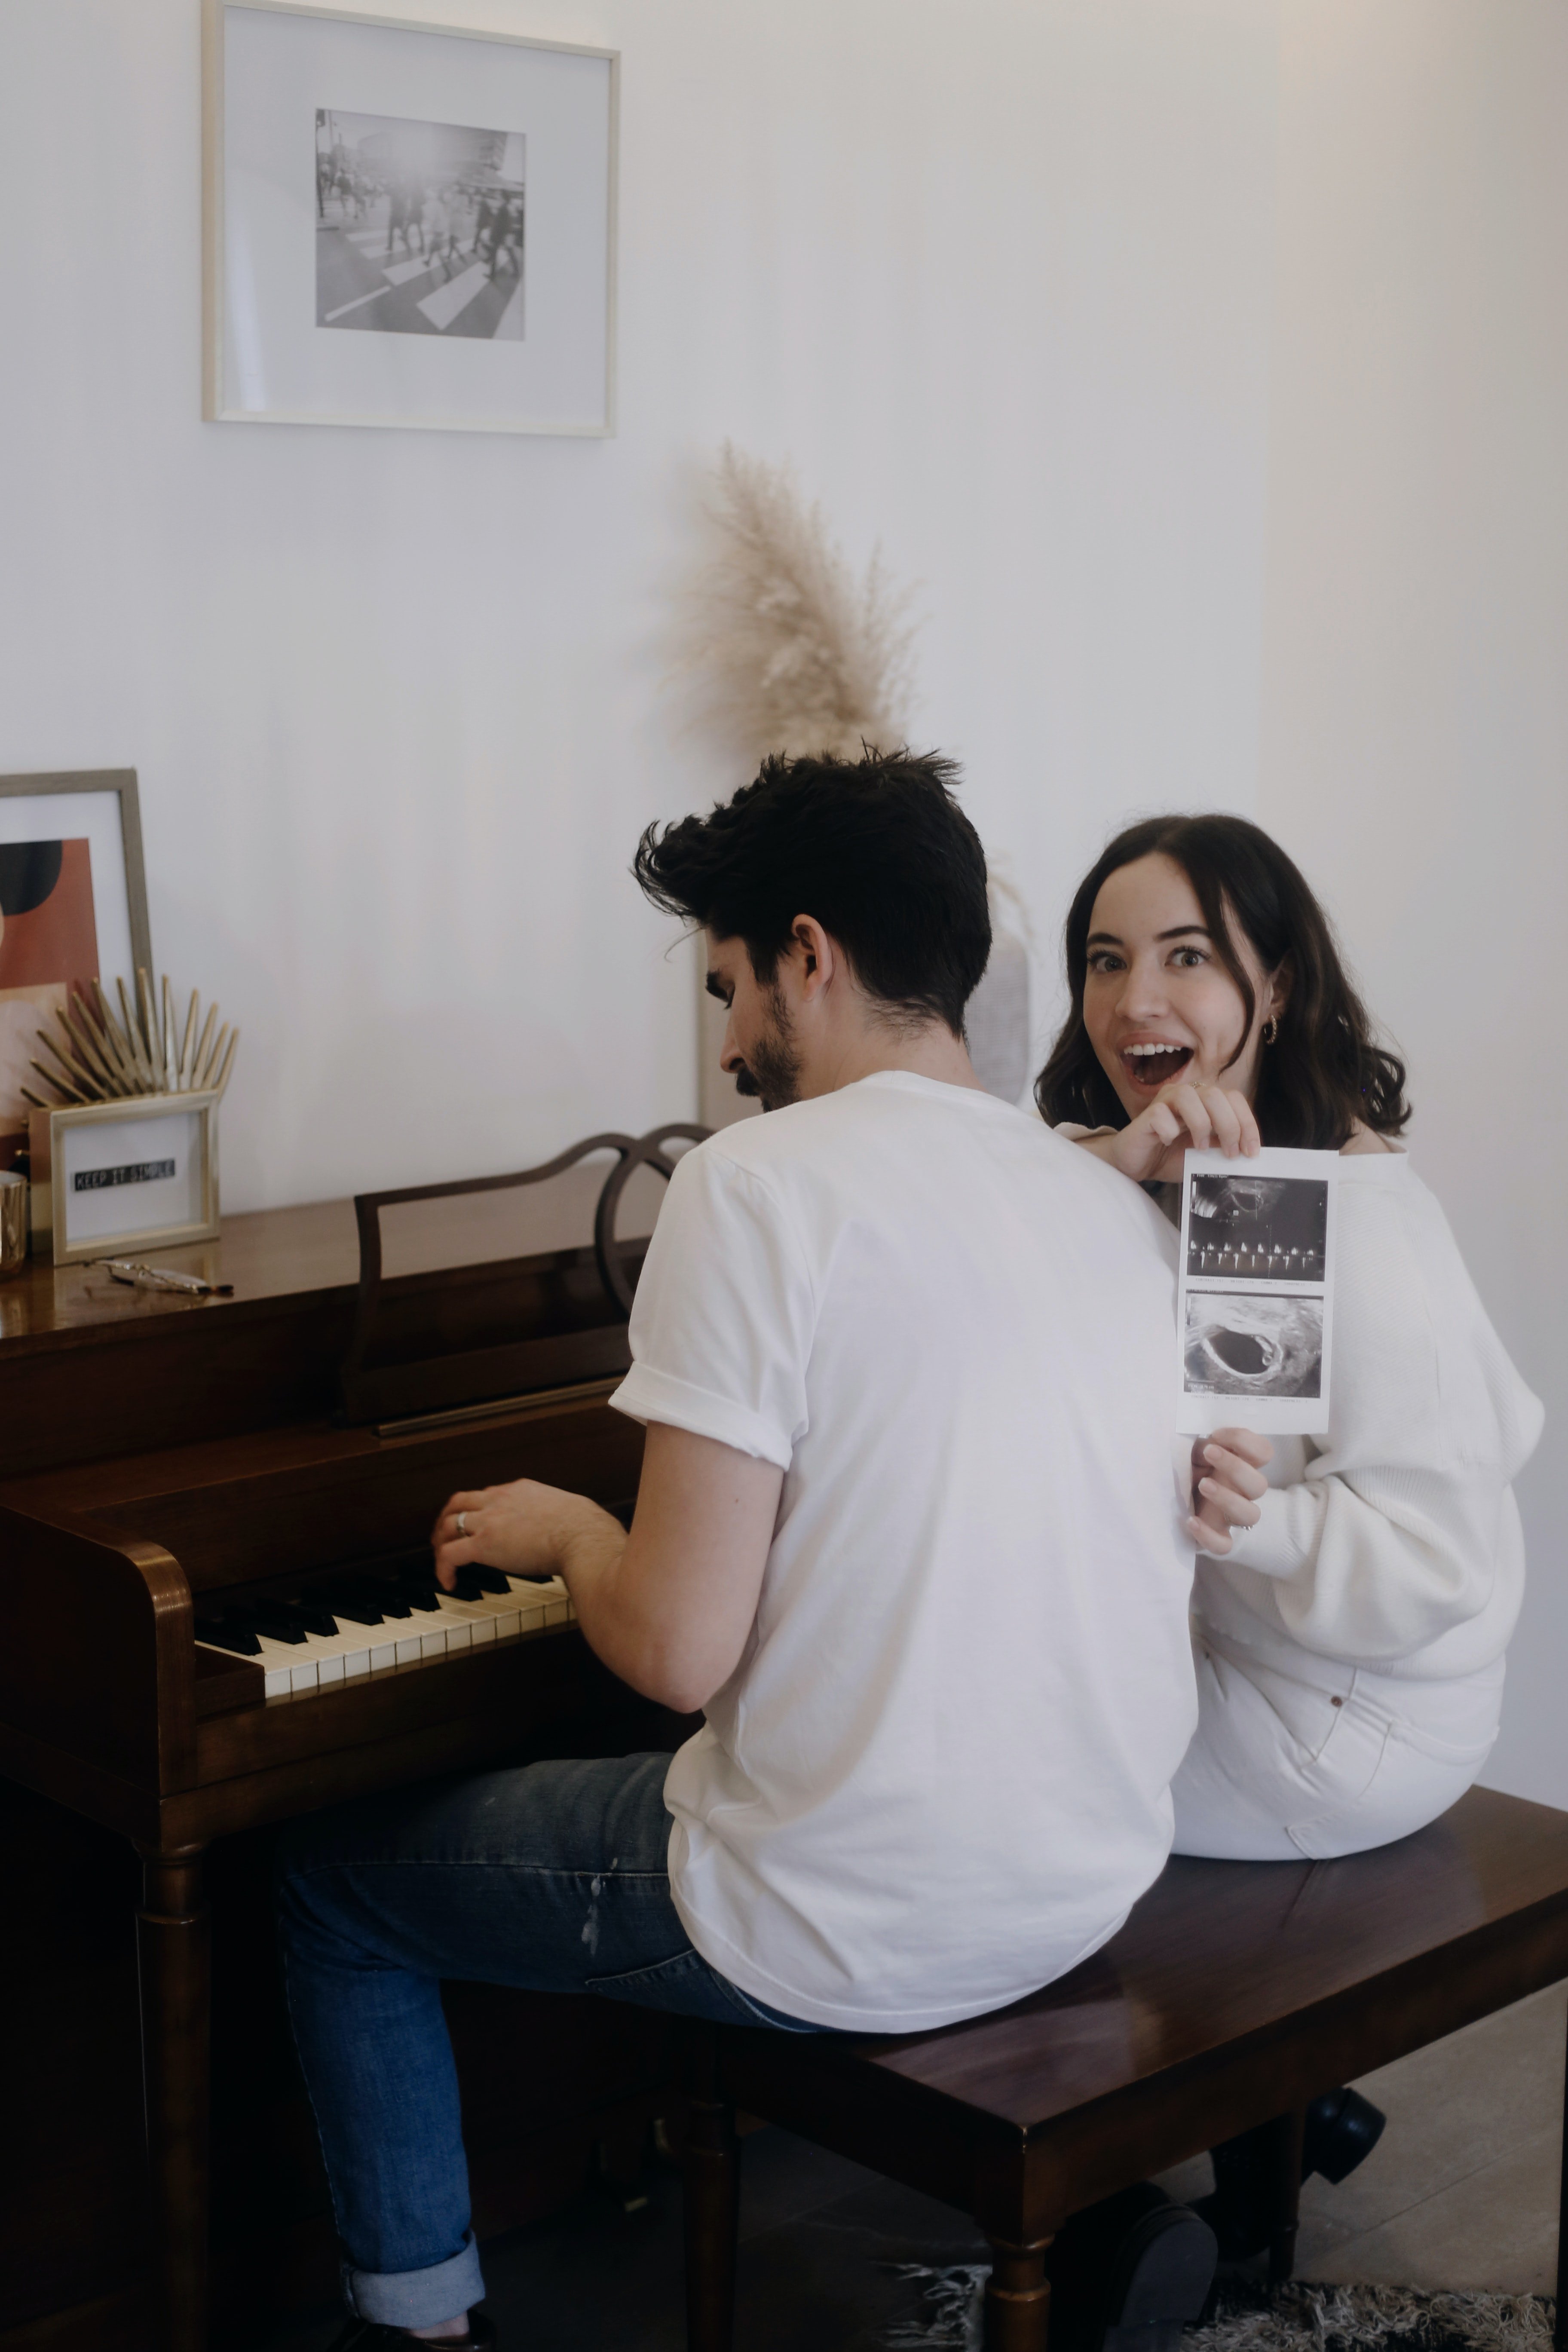 Wife flaunts an ultrasound picture of her baby while her husband plays the piano | Photo: Unsplash/jonathansancheziam